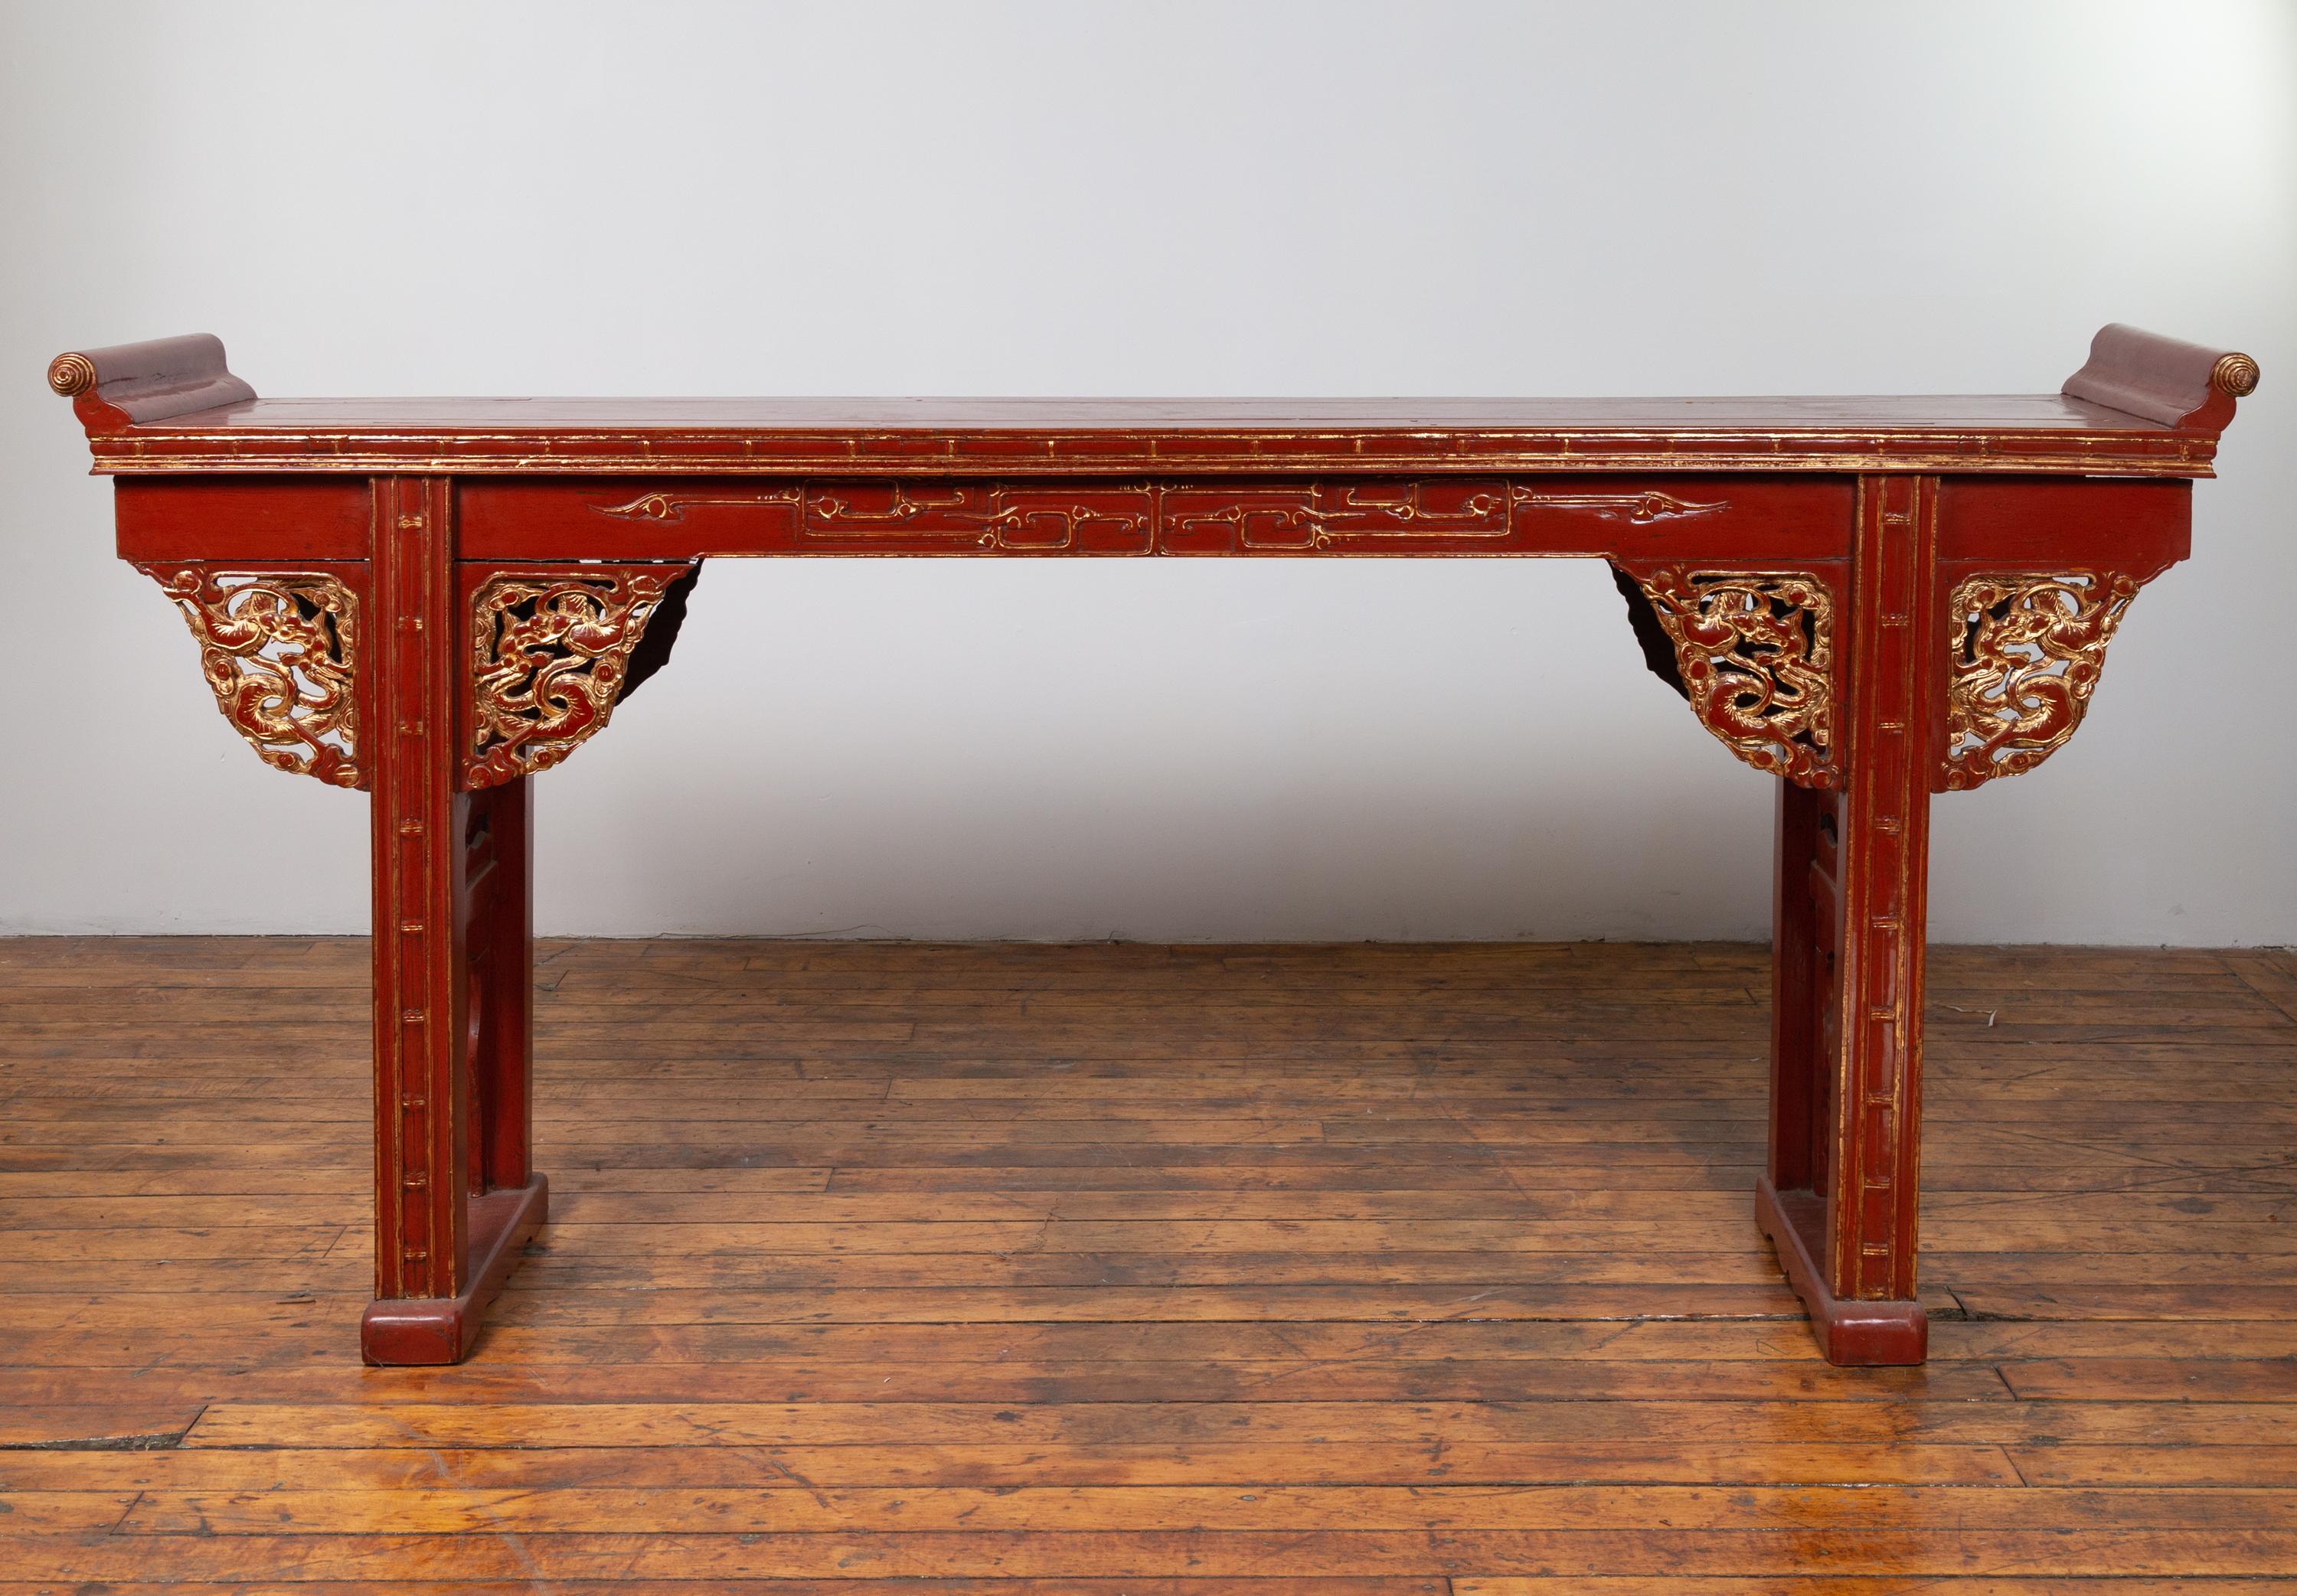 An antique Chinese Ming Dynasty style red lacquered altar console table from the 19th century, with everted flanges, carved apron and gilt accents. Born in China during the 19th century, this exquisite altar console table features a red lacquered